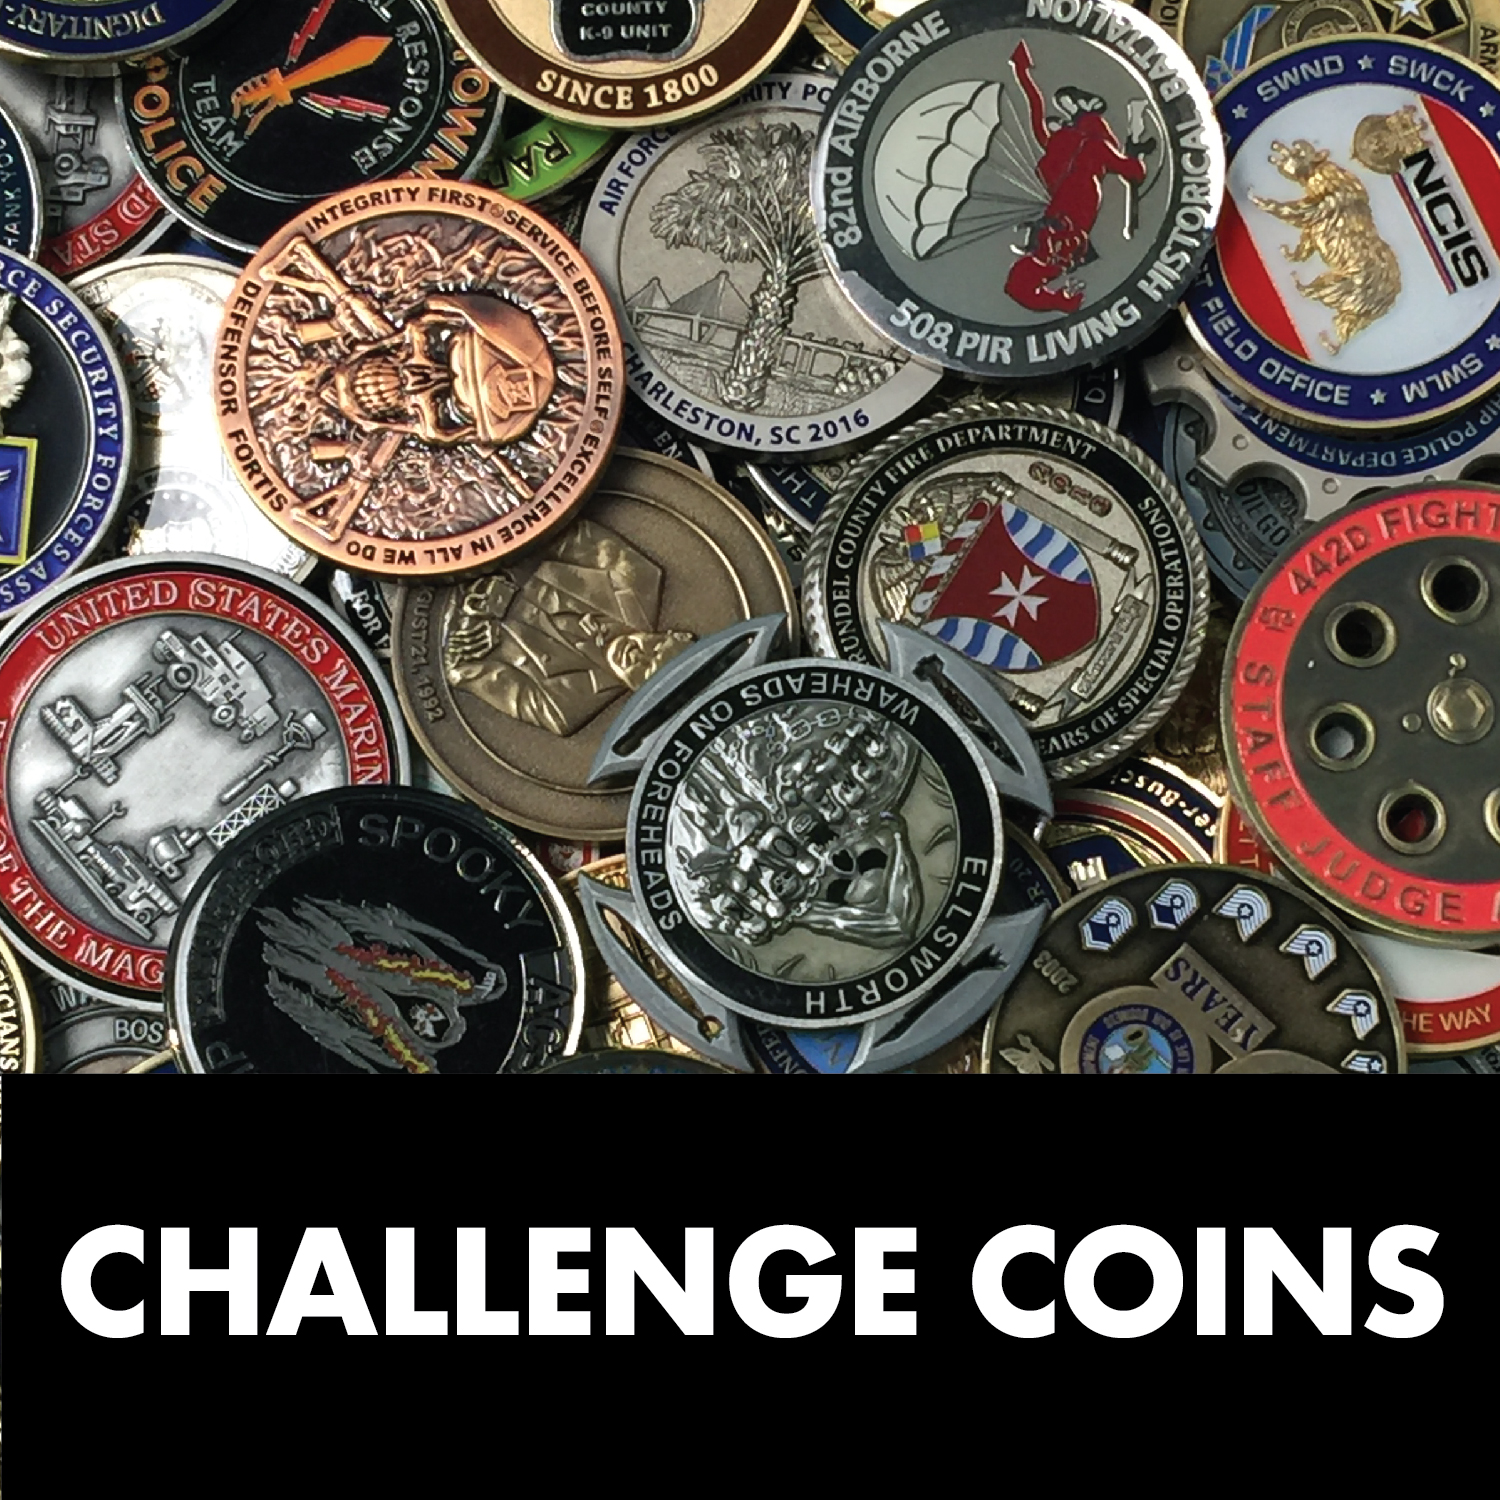 Custom challenge coin by Gray Water Ops - sample images and more info on challenge coins